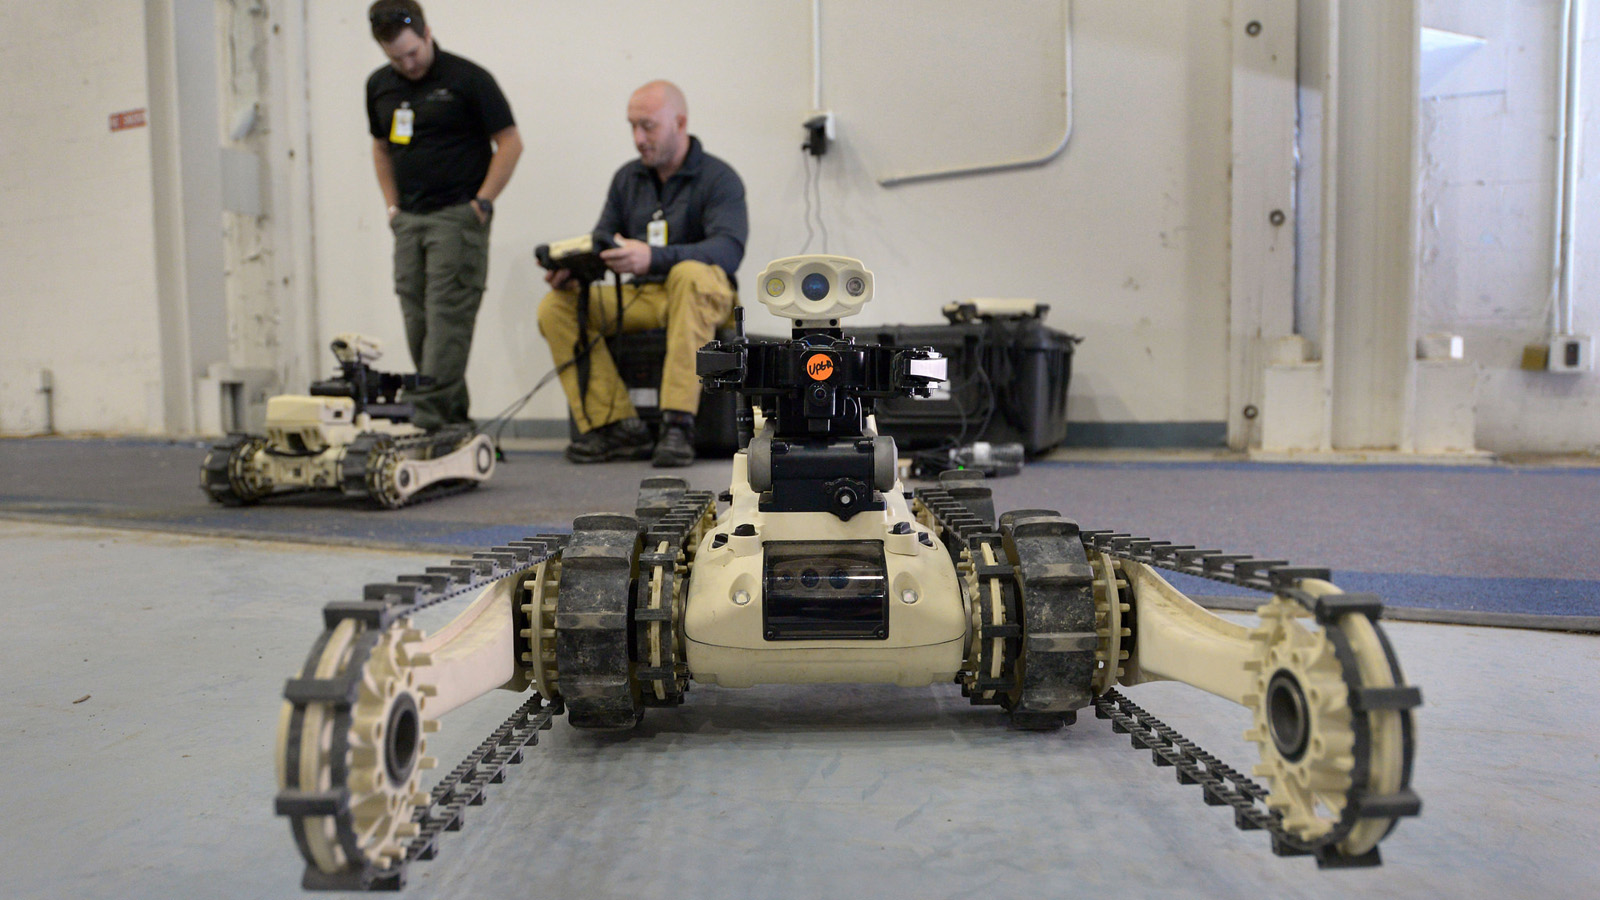 A Rodeo For Bomb Disposal Robots Looks Dangerous